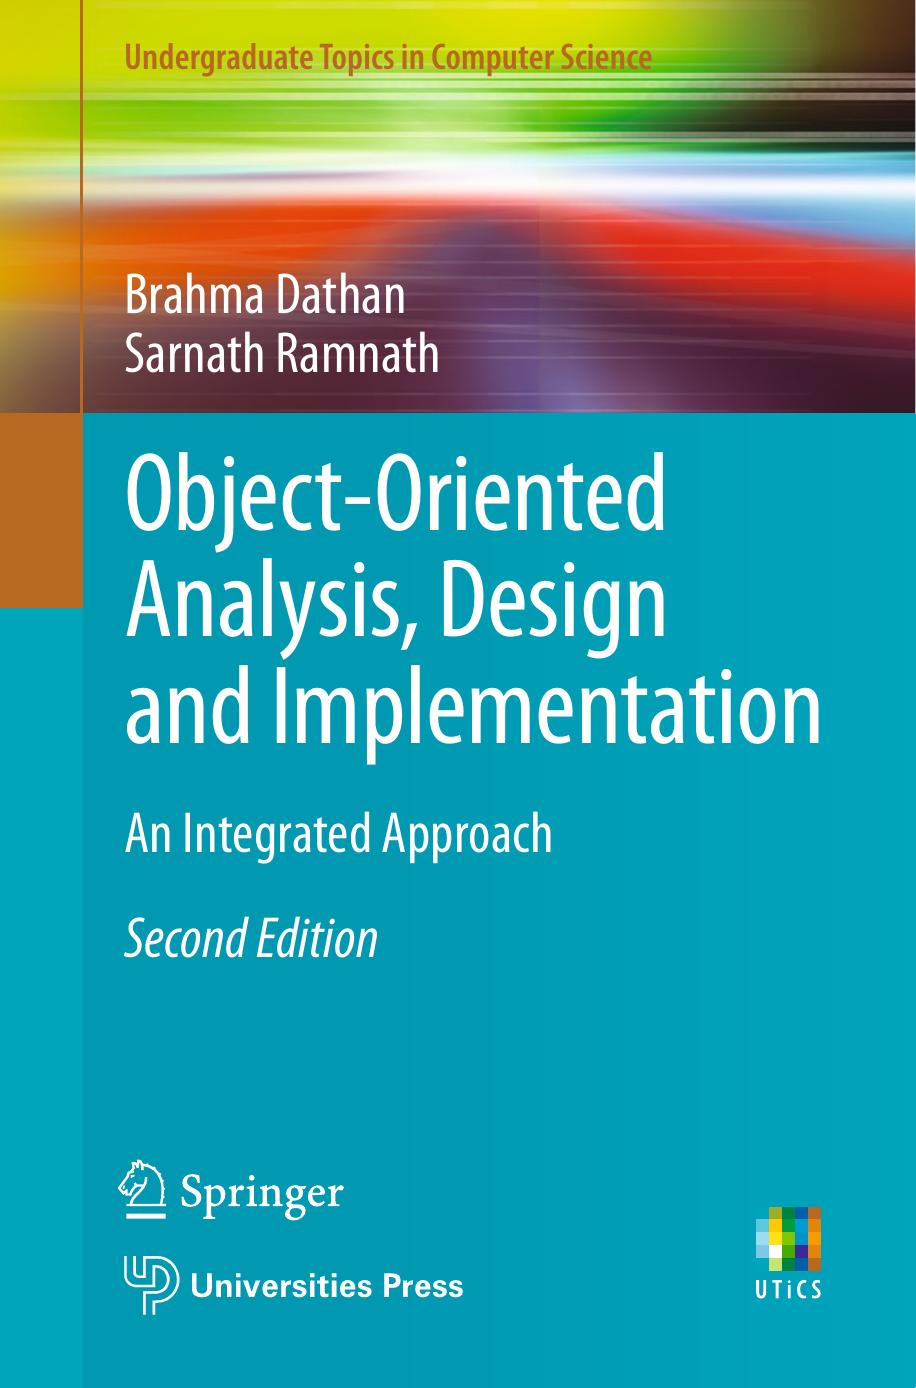 Object-Oriented Analysis, Design and Implementation by Brahma Dathan & Sarnath Ramnath